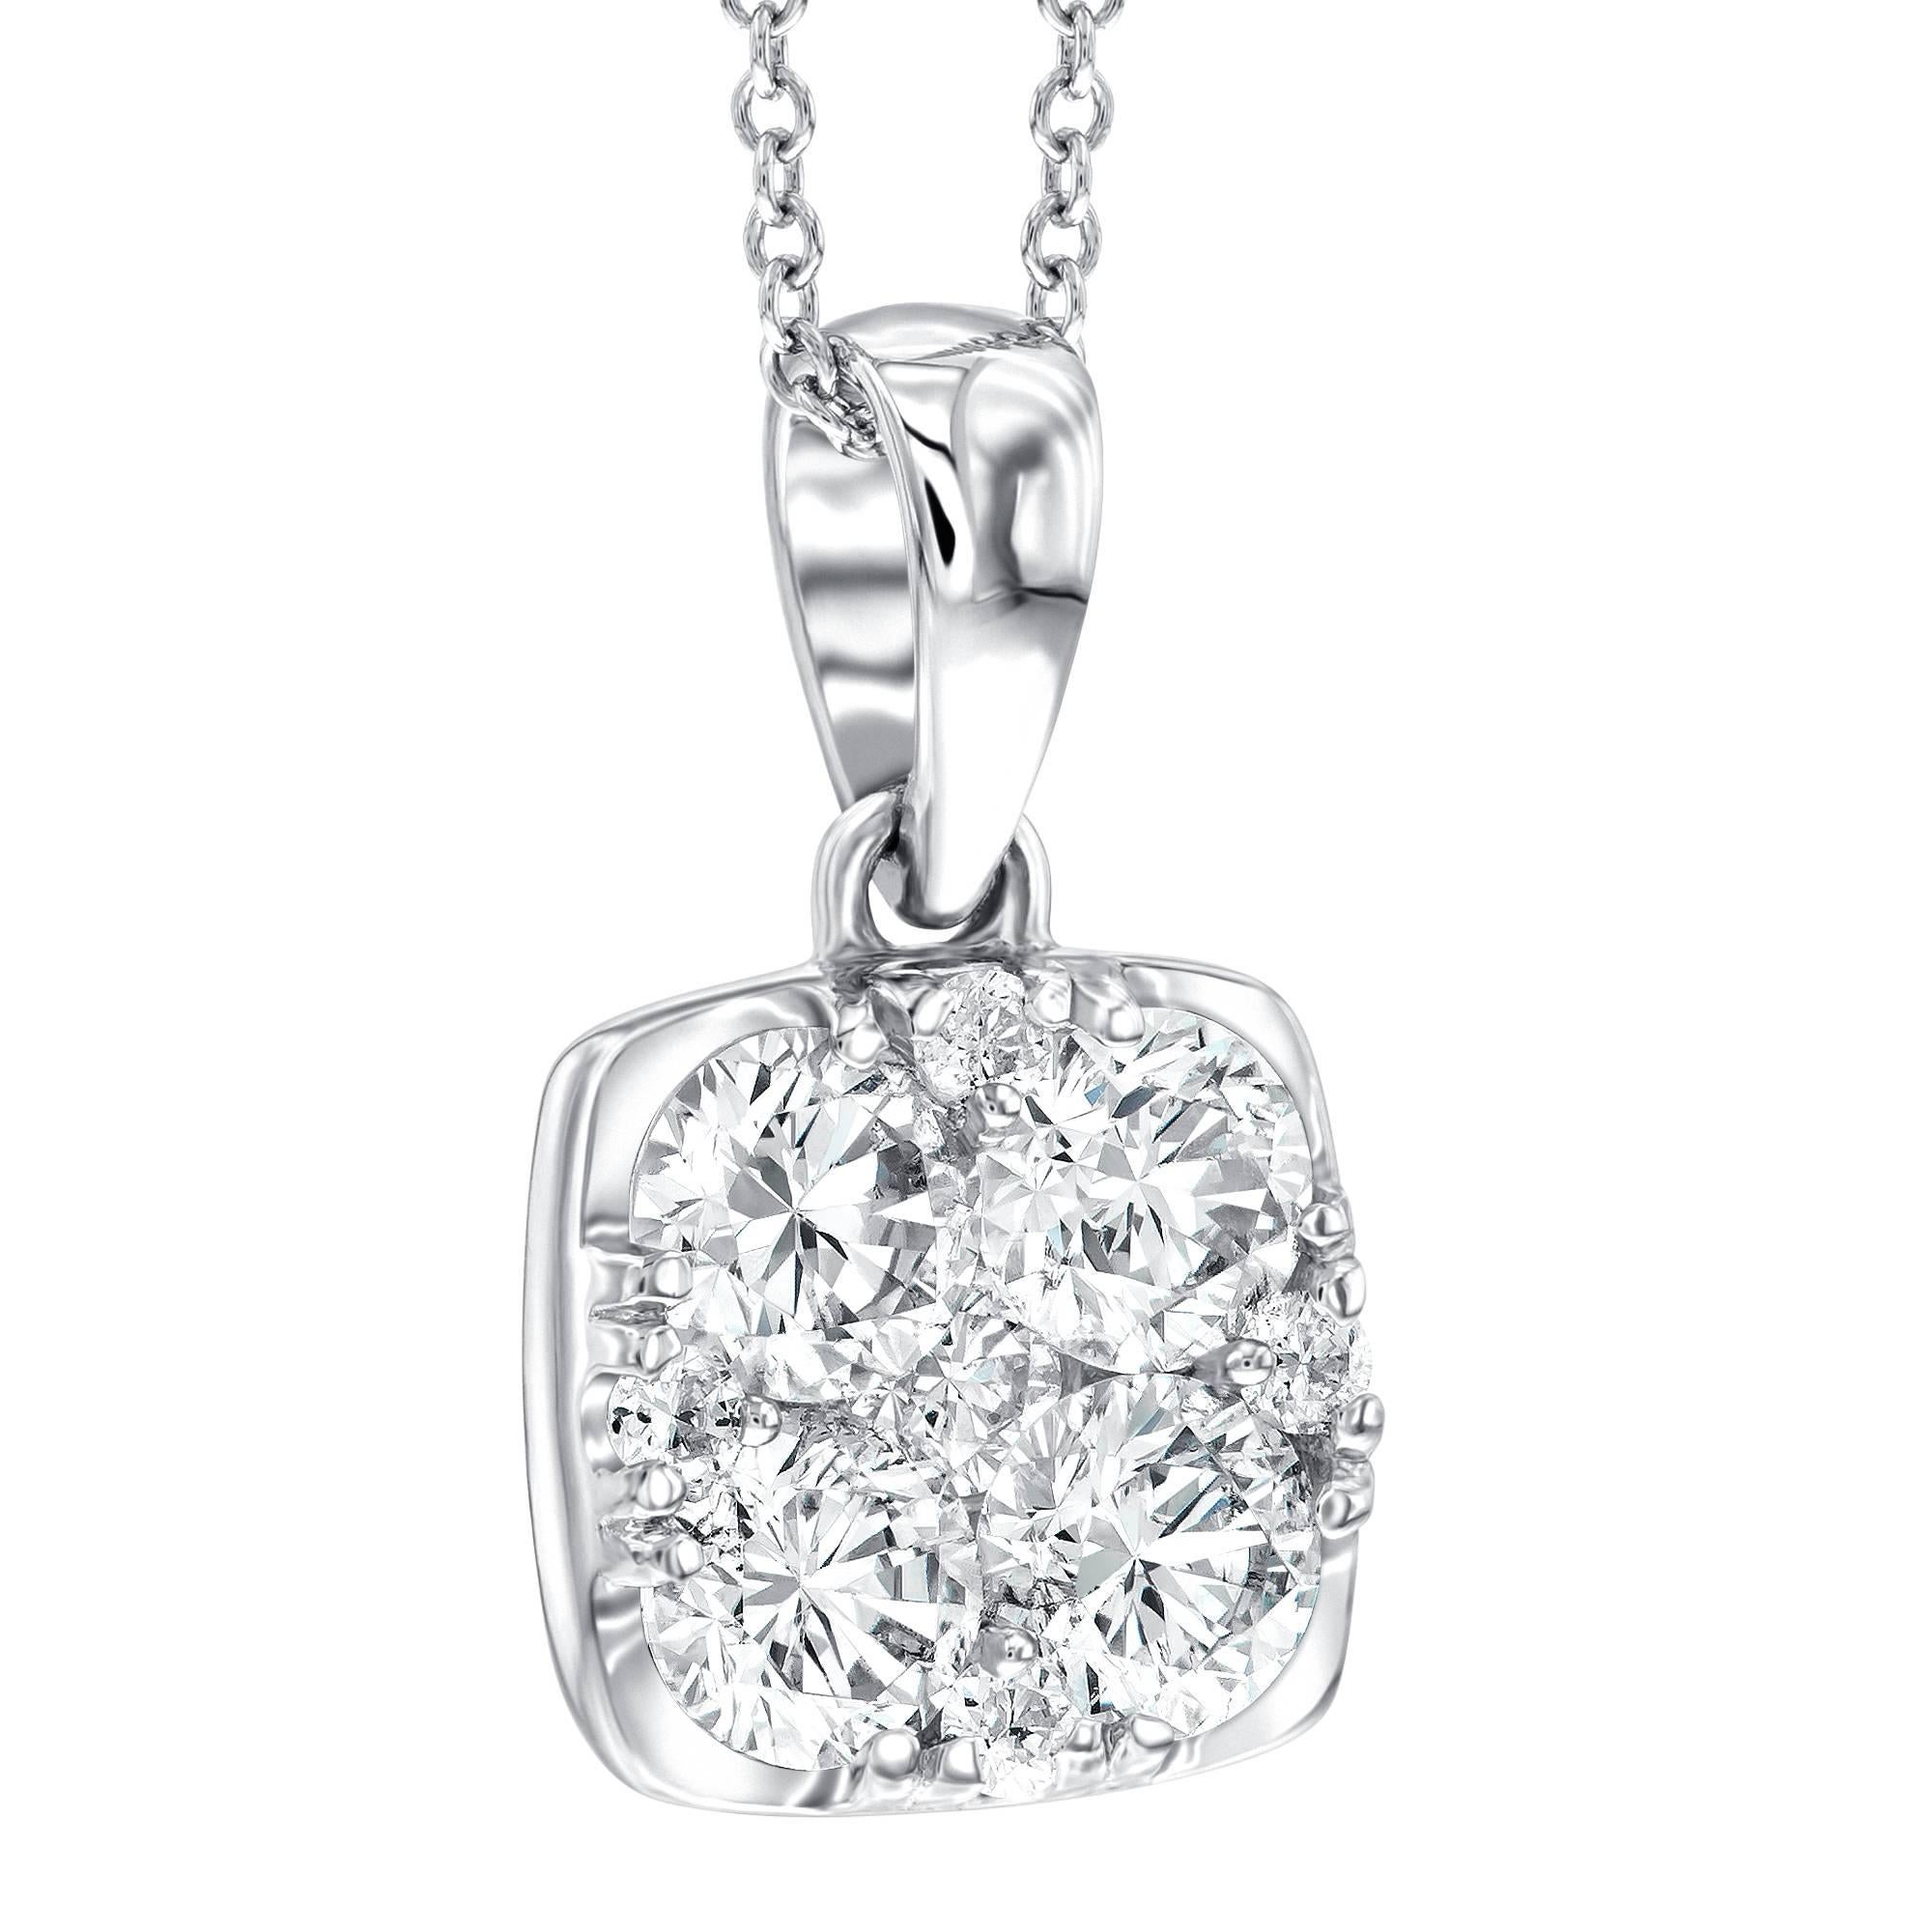 A gorgeous 1.00ct claw set Cushion Cut pendant, inlaid with various size diamonds this pendant has a unique studded finish that really captures the light. Set in 18ct White Gold which enhances the brilliance of the H-SI white diamonds. This pendant